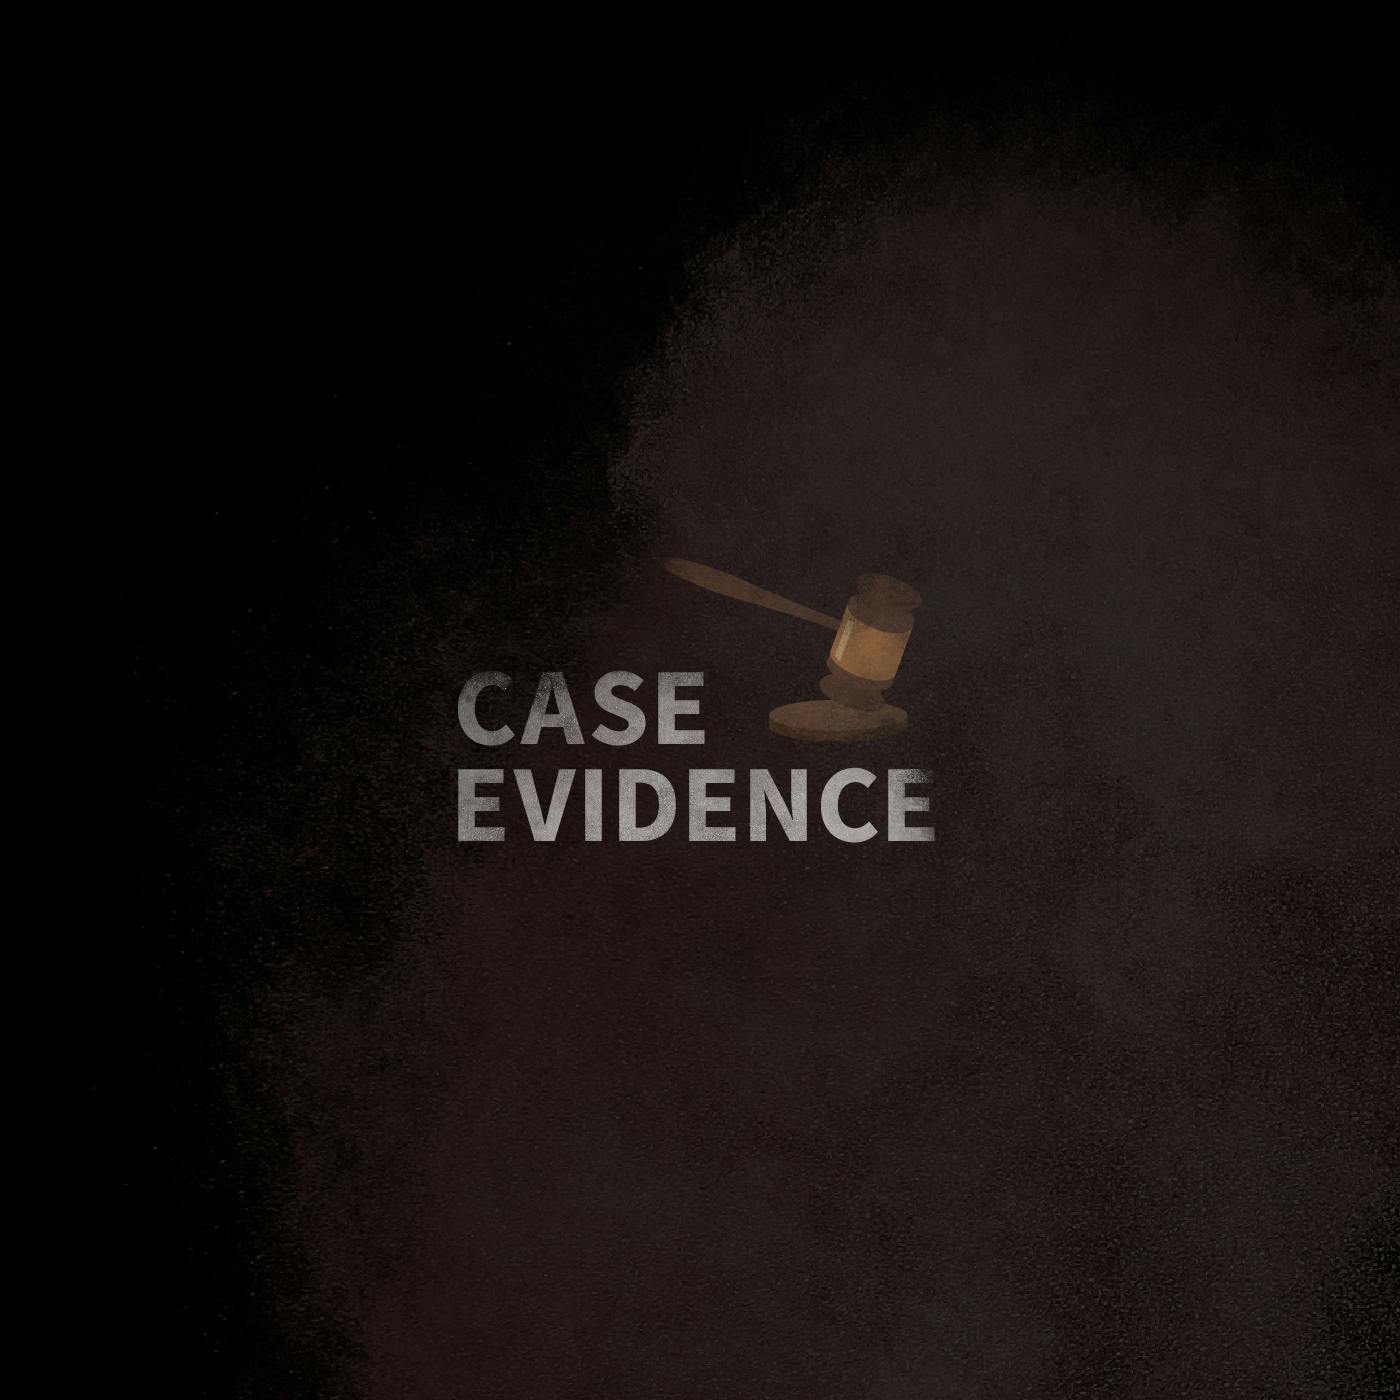 Case Evidence 03.06.17 by Tenderfoot TV